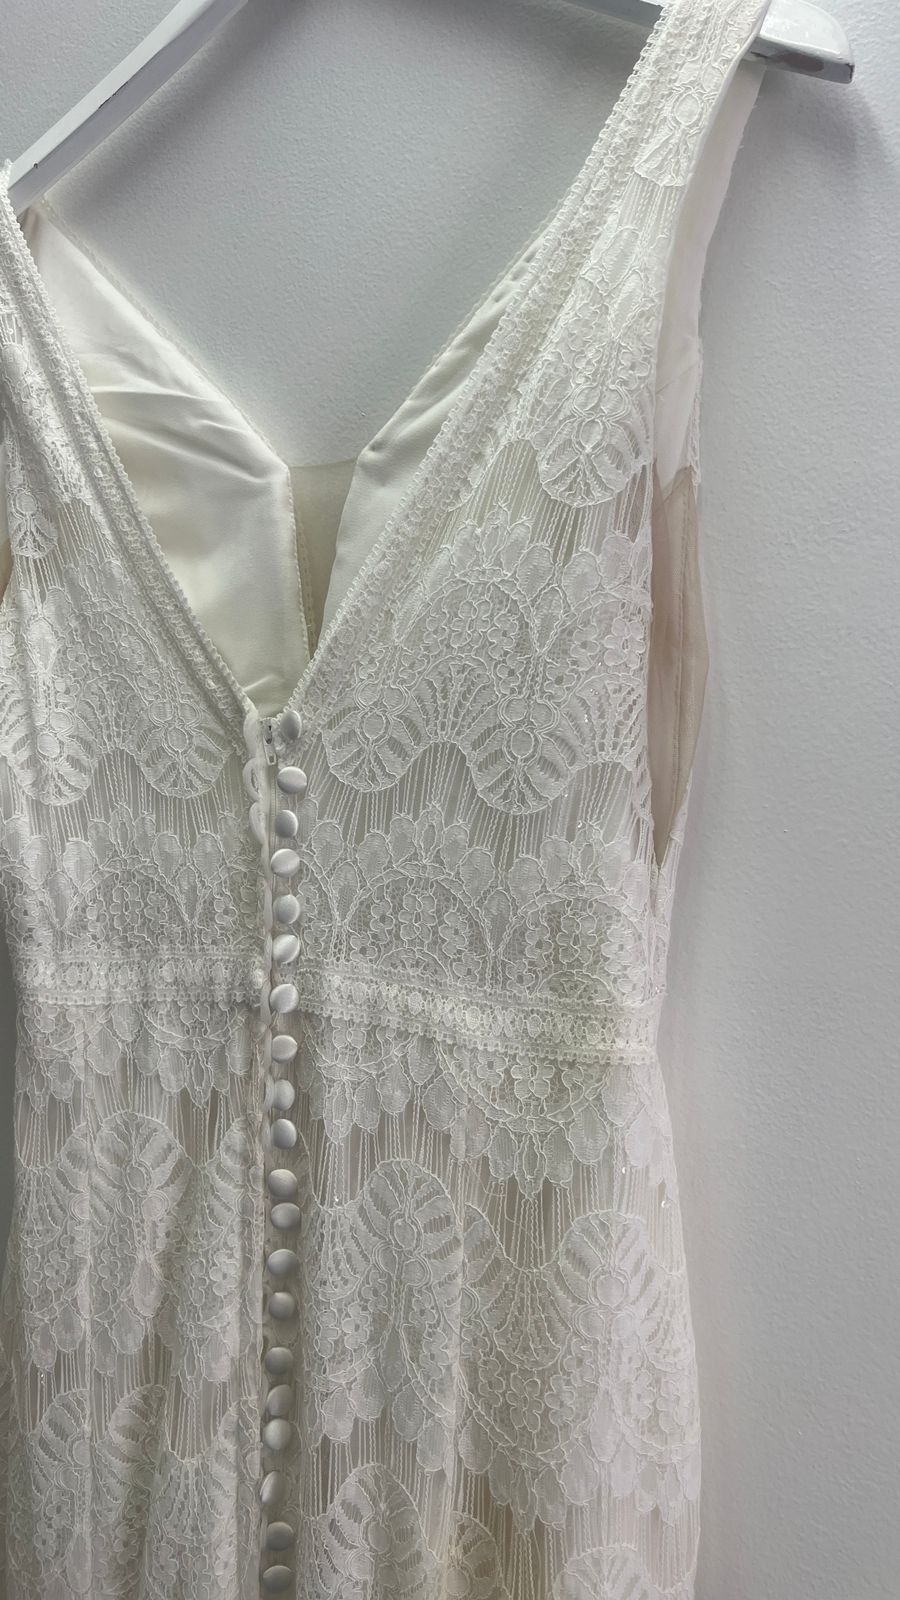 CODE 2008: Off-white full lace, Size 14